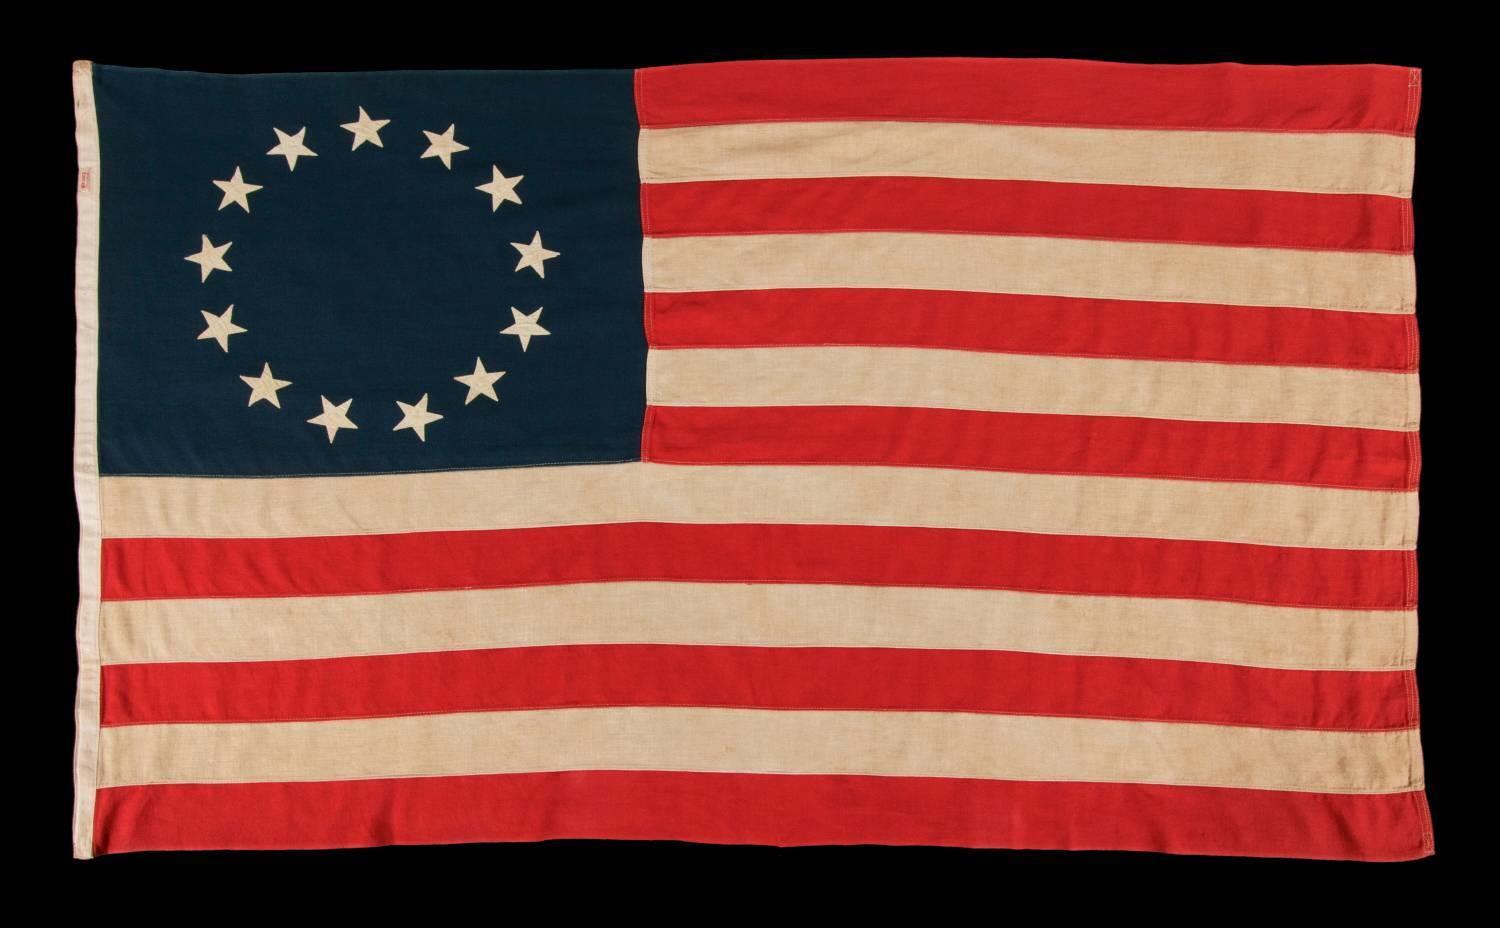 13 STARS IN THE BETSY ROSS PATTERN, MADE BY ANNIN IN NEW YORK CITY, A SCARCE SEWN EXAMPLE IN A DESIRABLE SMALL SCALE, 1914-1930:

 13 star American national flag, made in the period between approximately 1914 and 1930. The stars are arranged in the